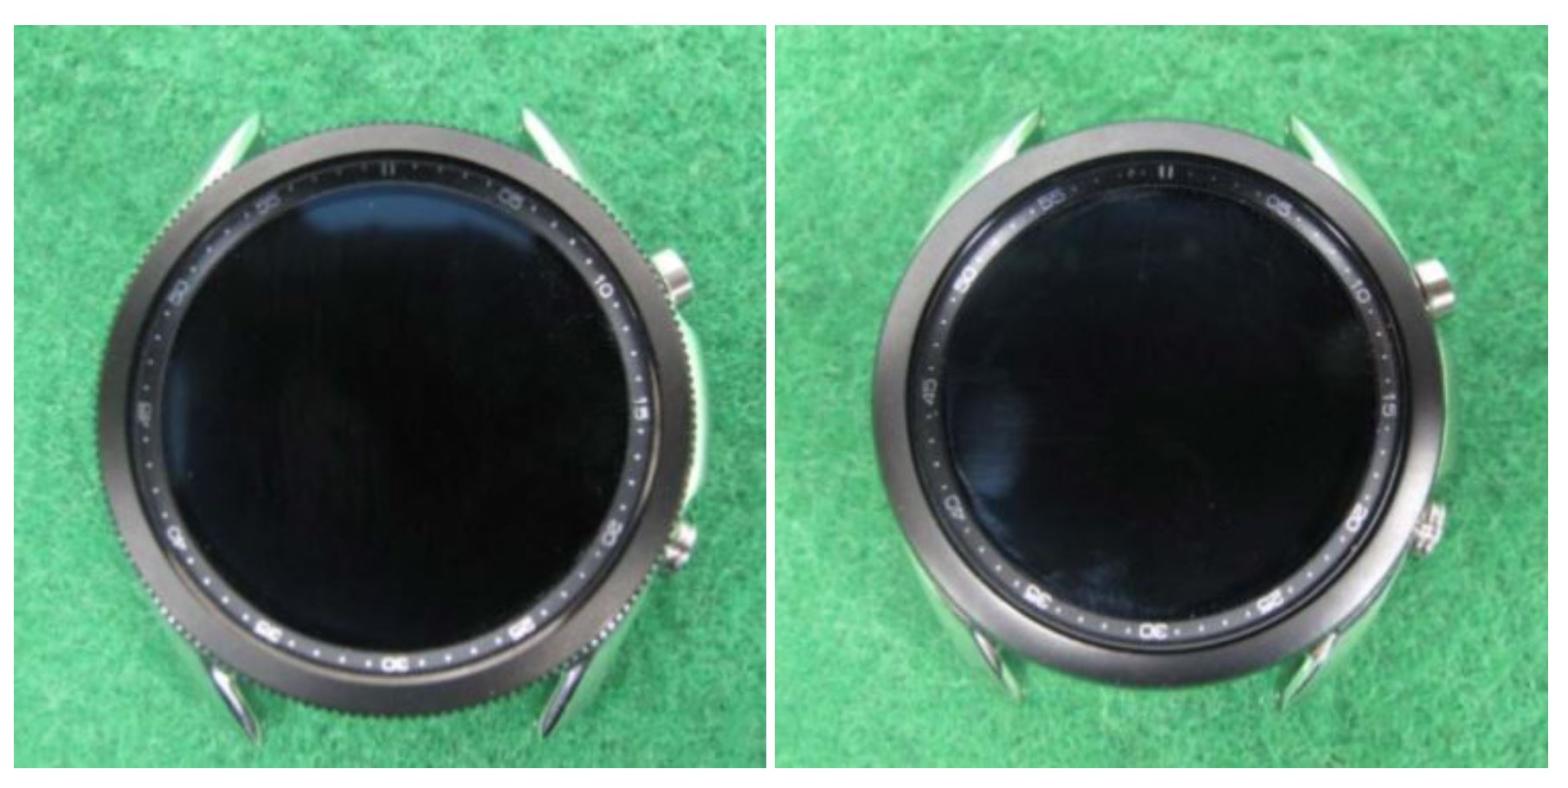 Some alleged pics of the Galaxy Watch 3: model number SM-R840 (left) and SM-R850 (right). (Screenshot: Samsung (via Naver))